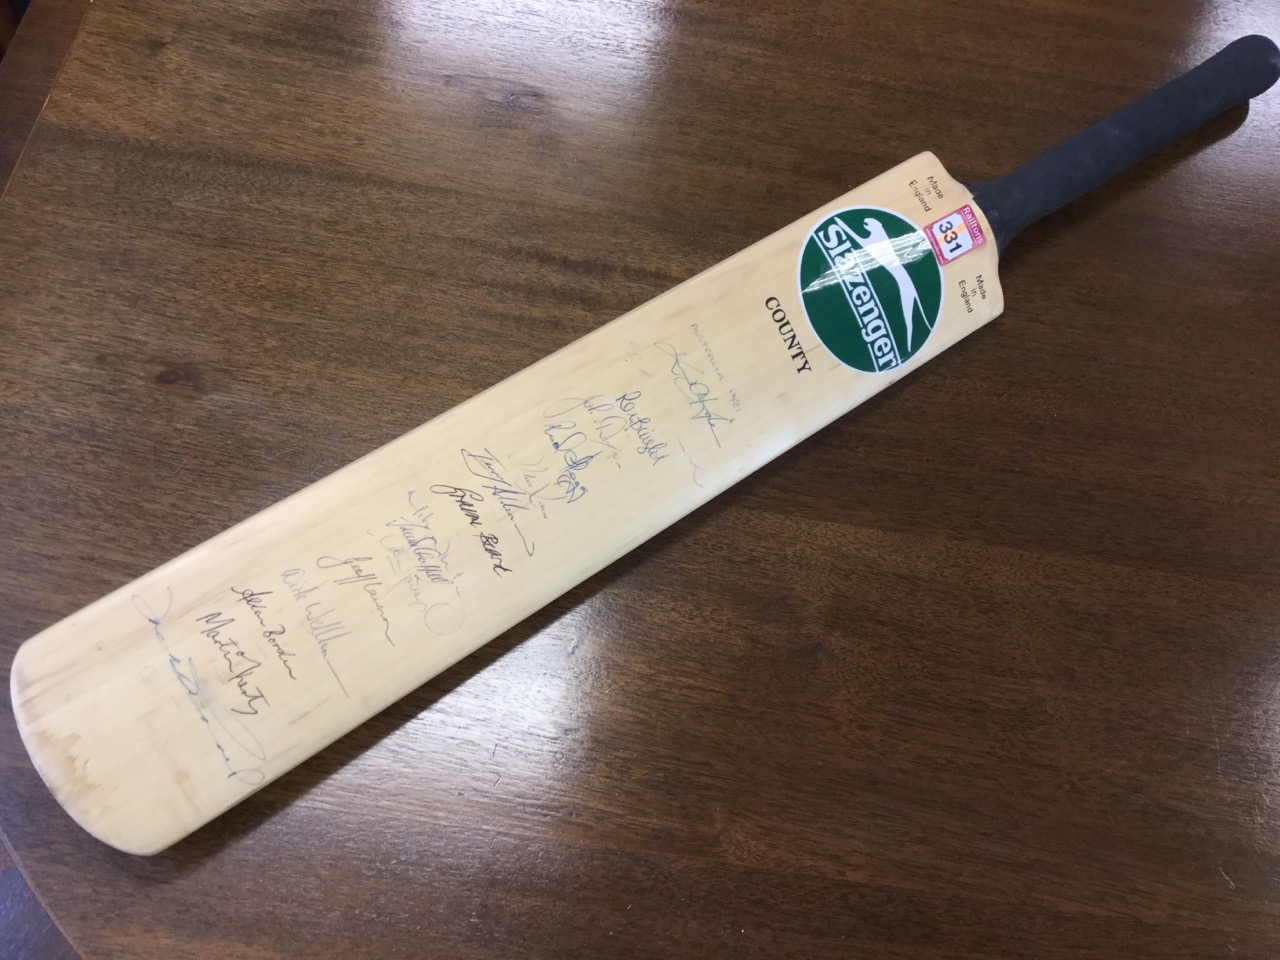 A Slazenger cricket bat signed by the Australian 1981 cricket team, with two county teams signatures